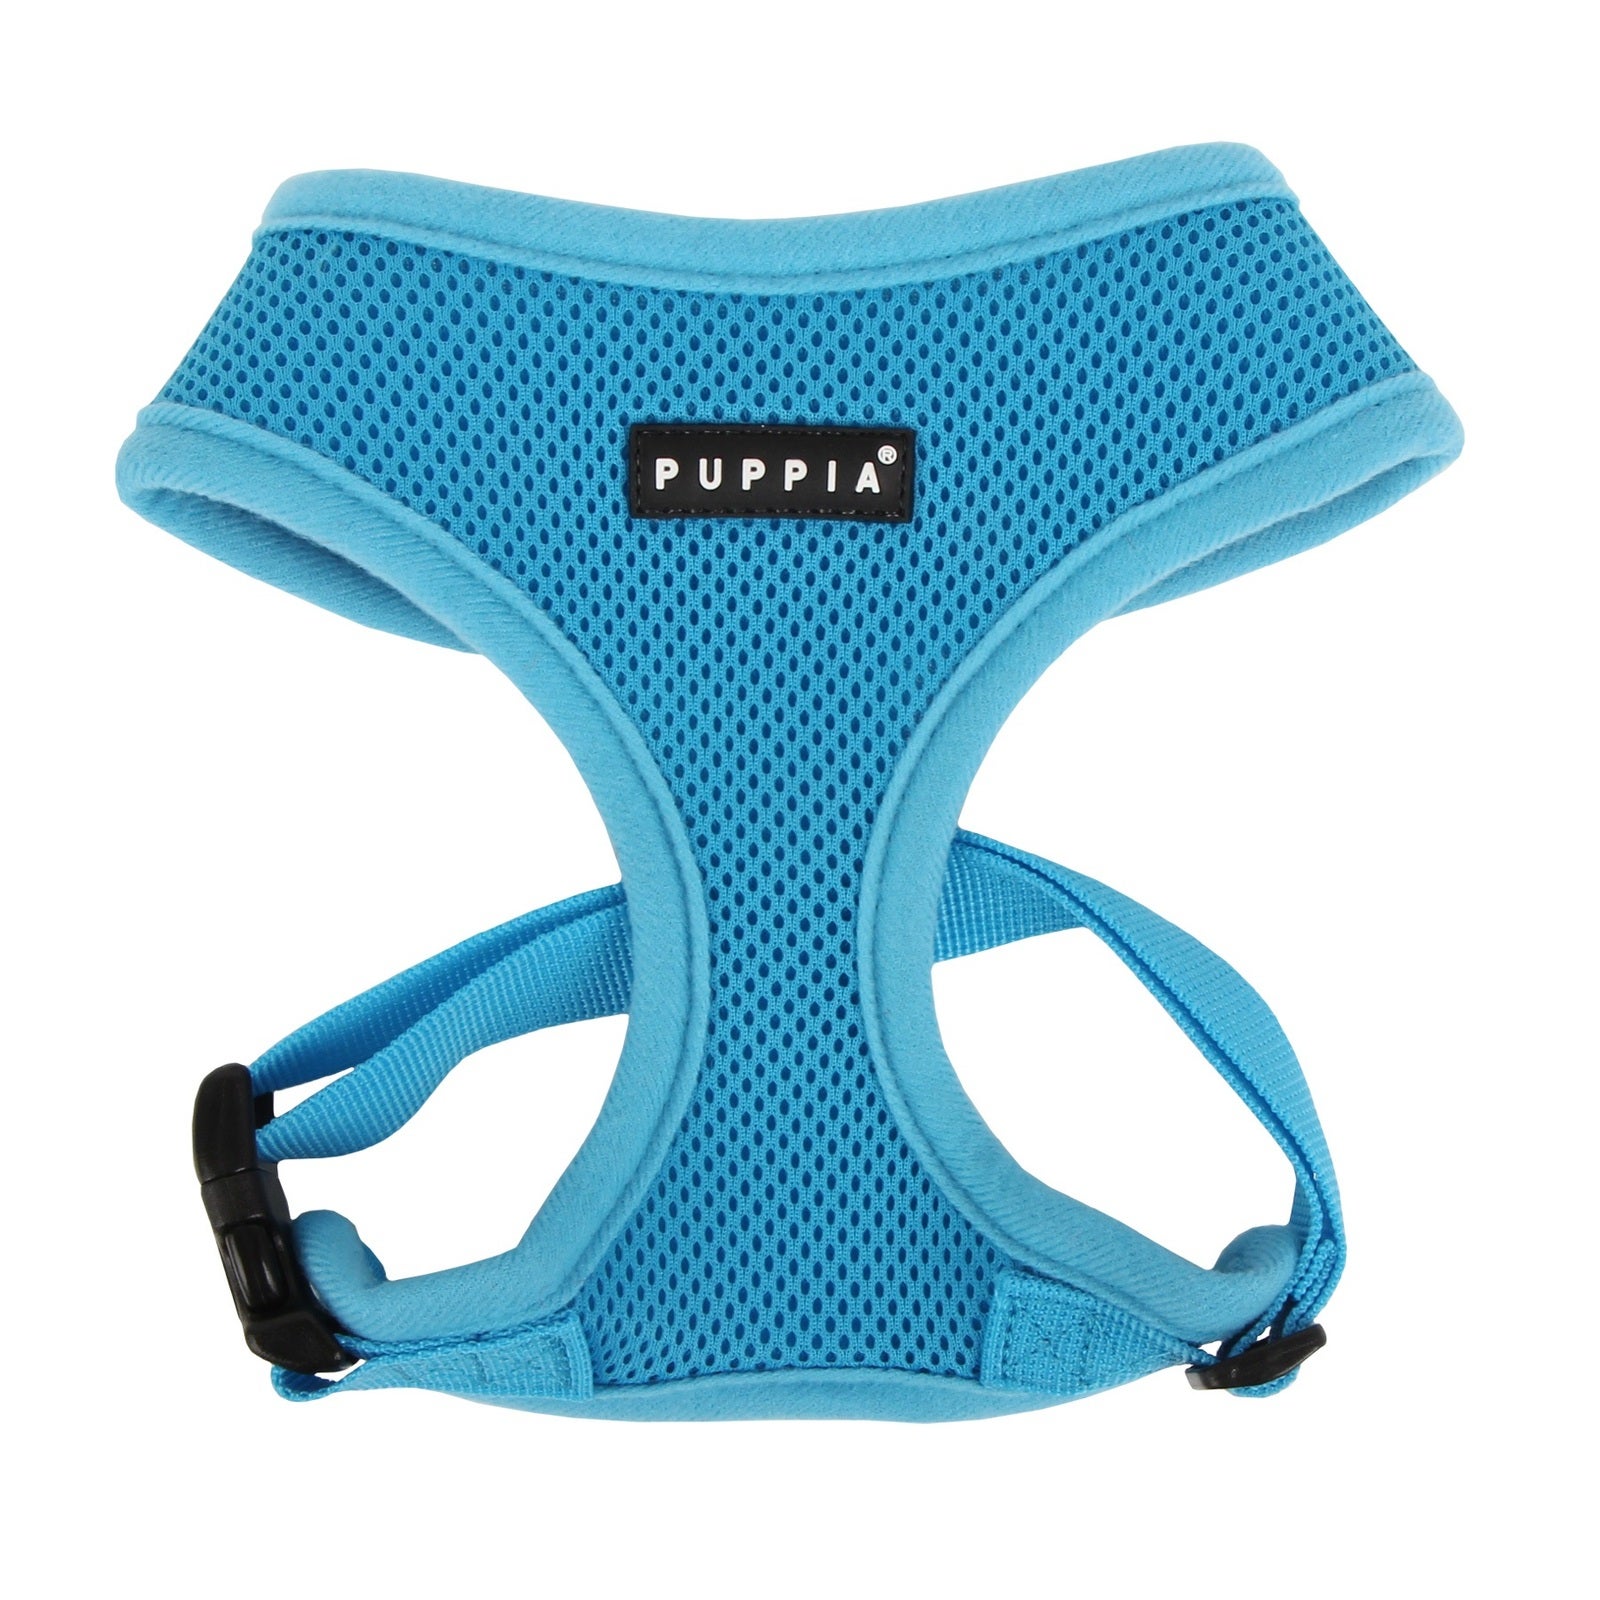 Puppia Soft Polyester Adjustable Dog Harness Sky Blue - 6 Sizes